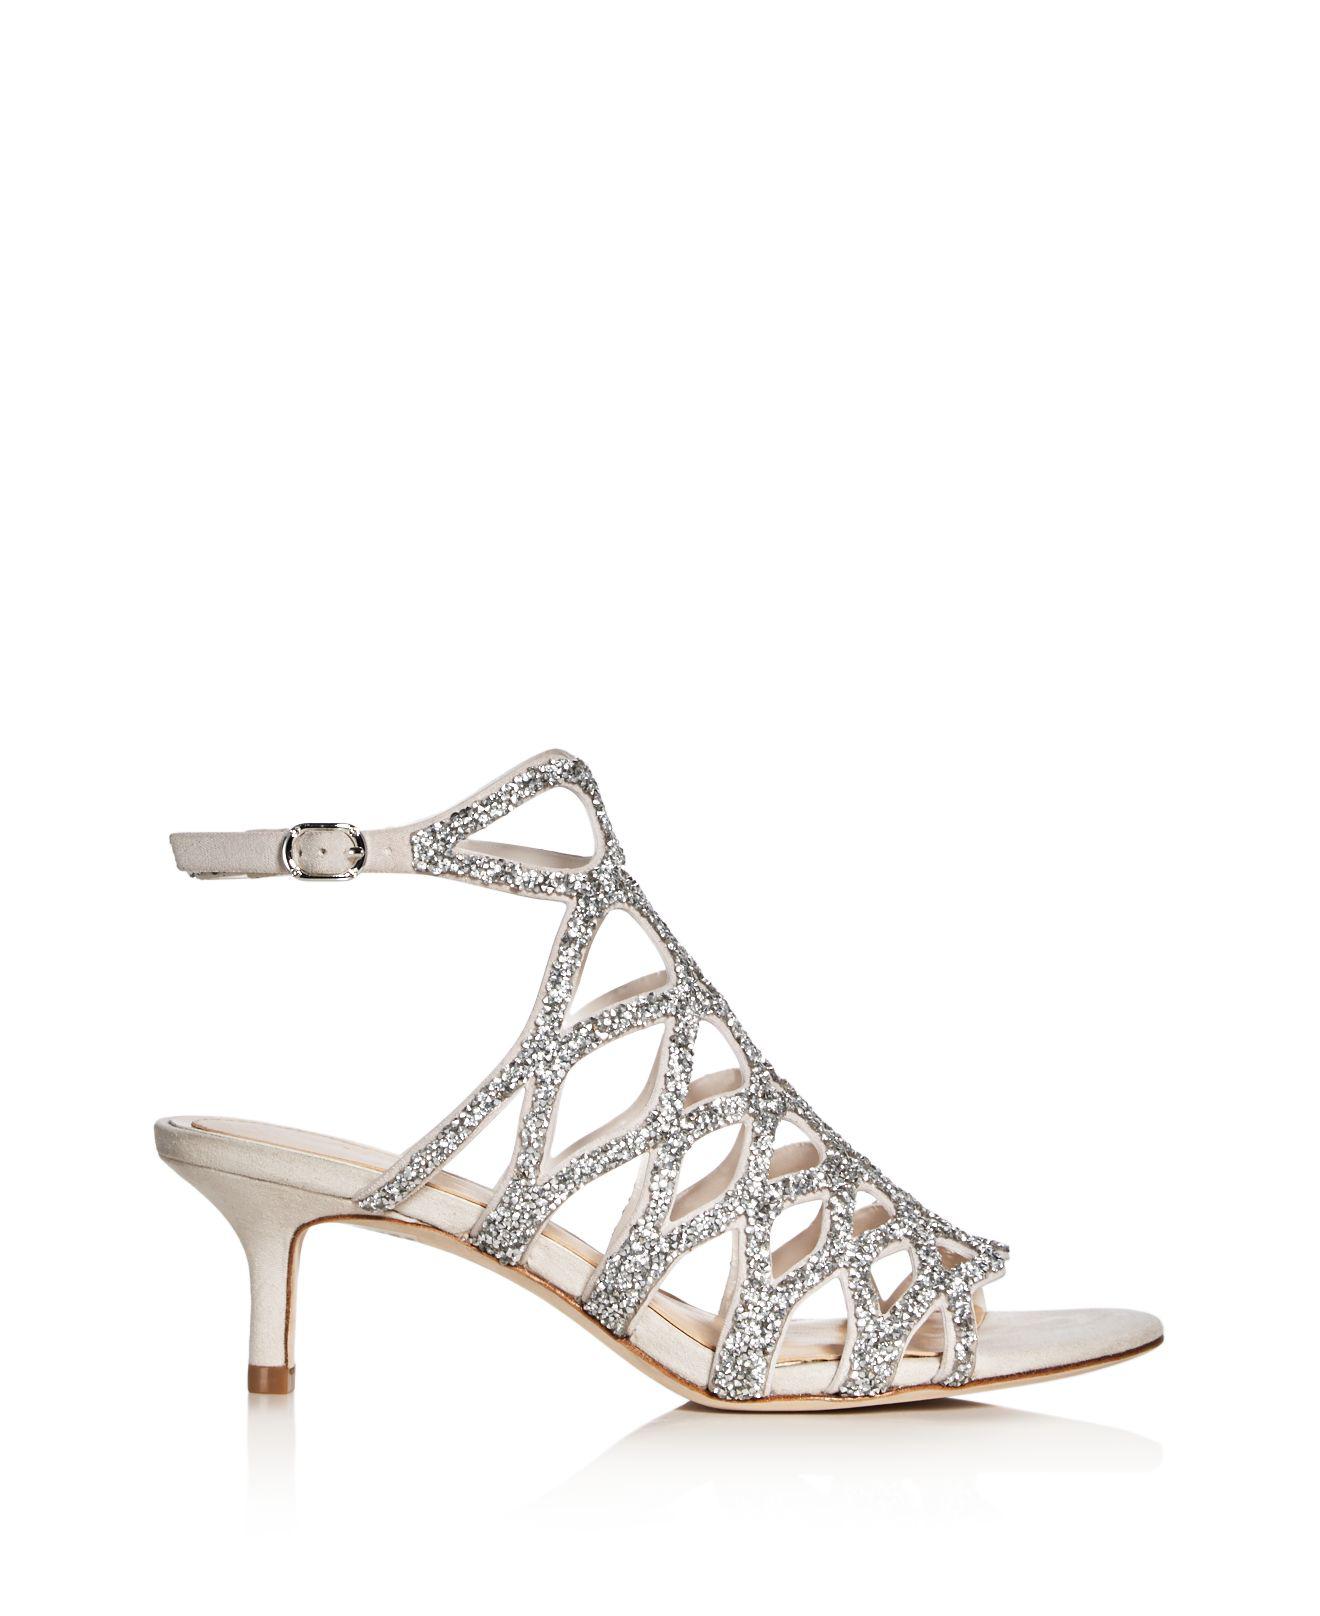 Imagine Vince Camuto Kami Crystal Embellished Caged Low Heel Sandals in  Metallic | Lyst